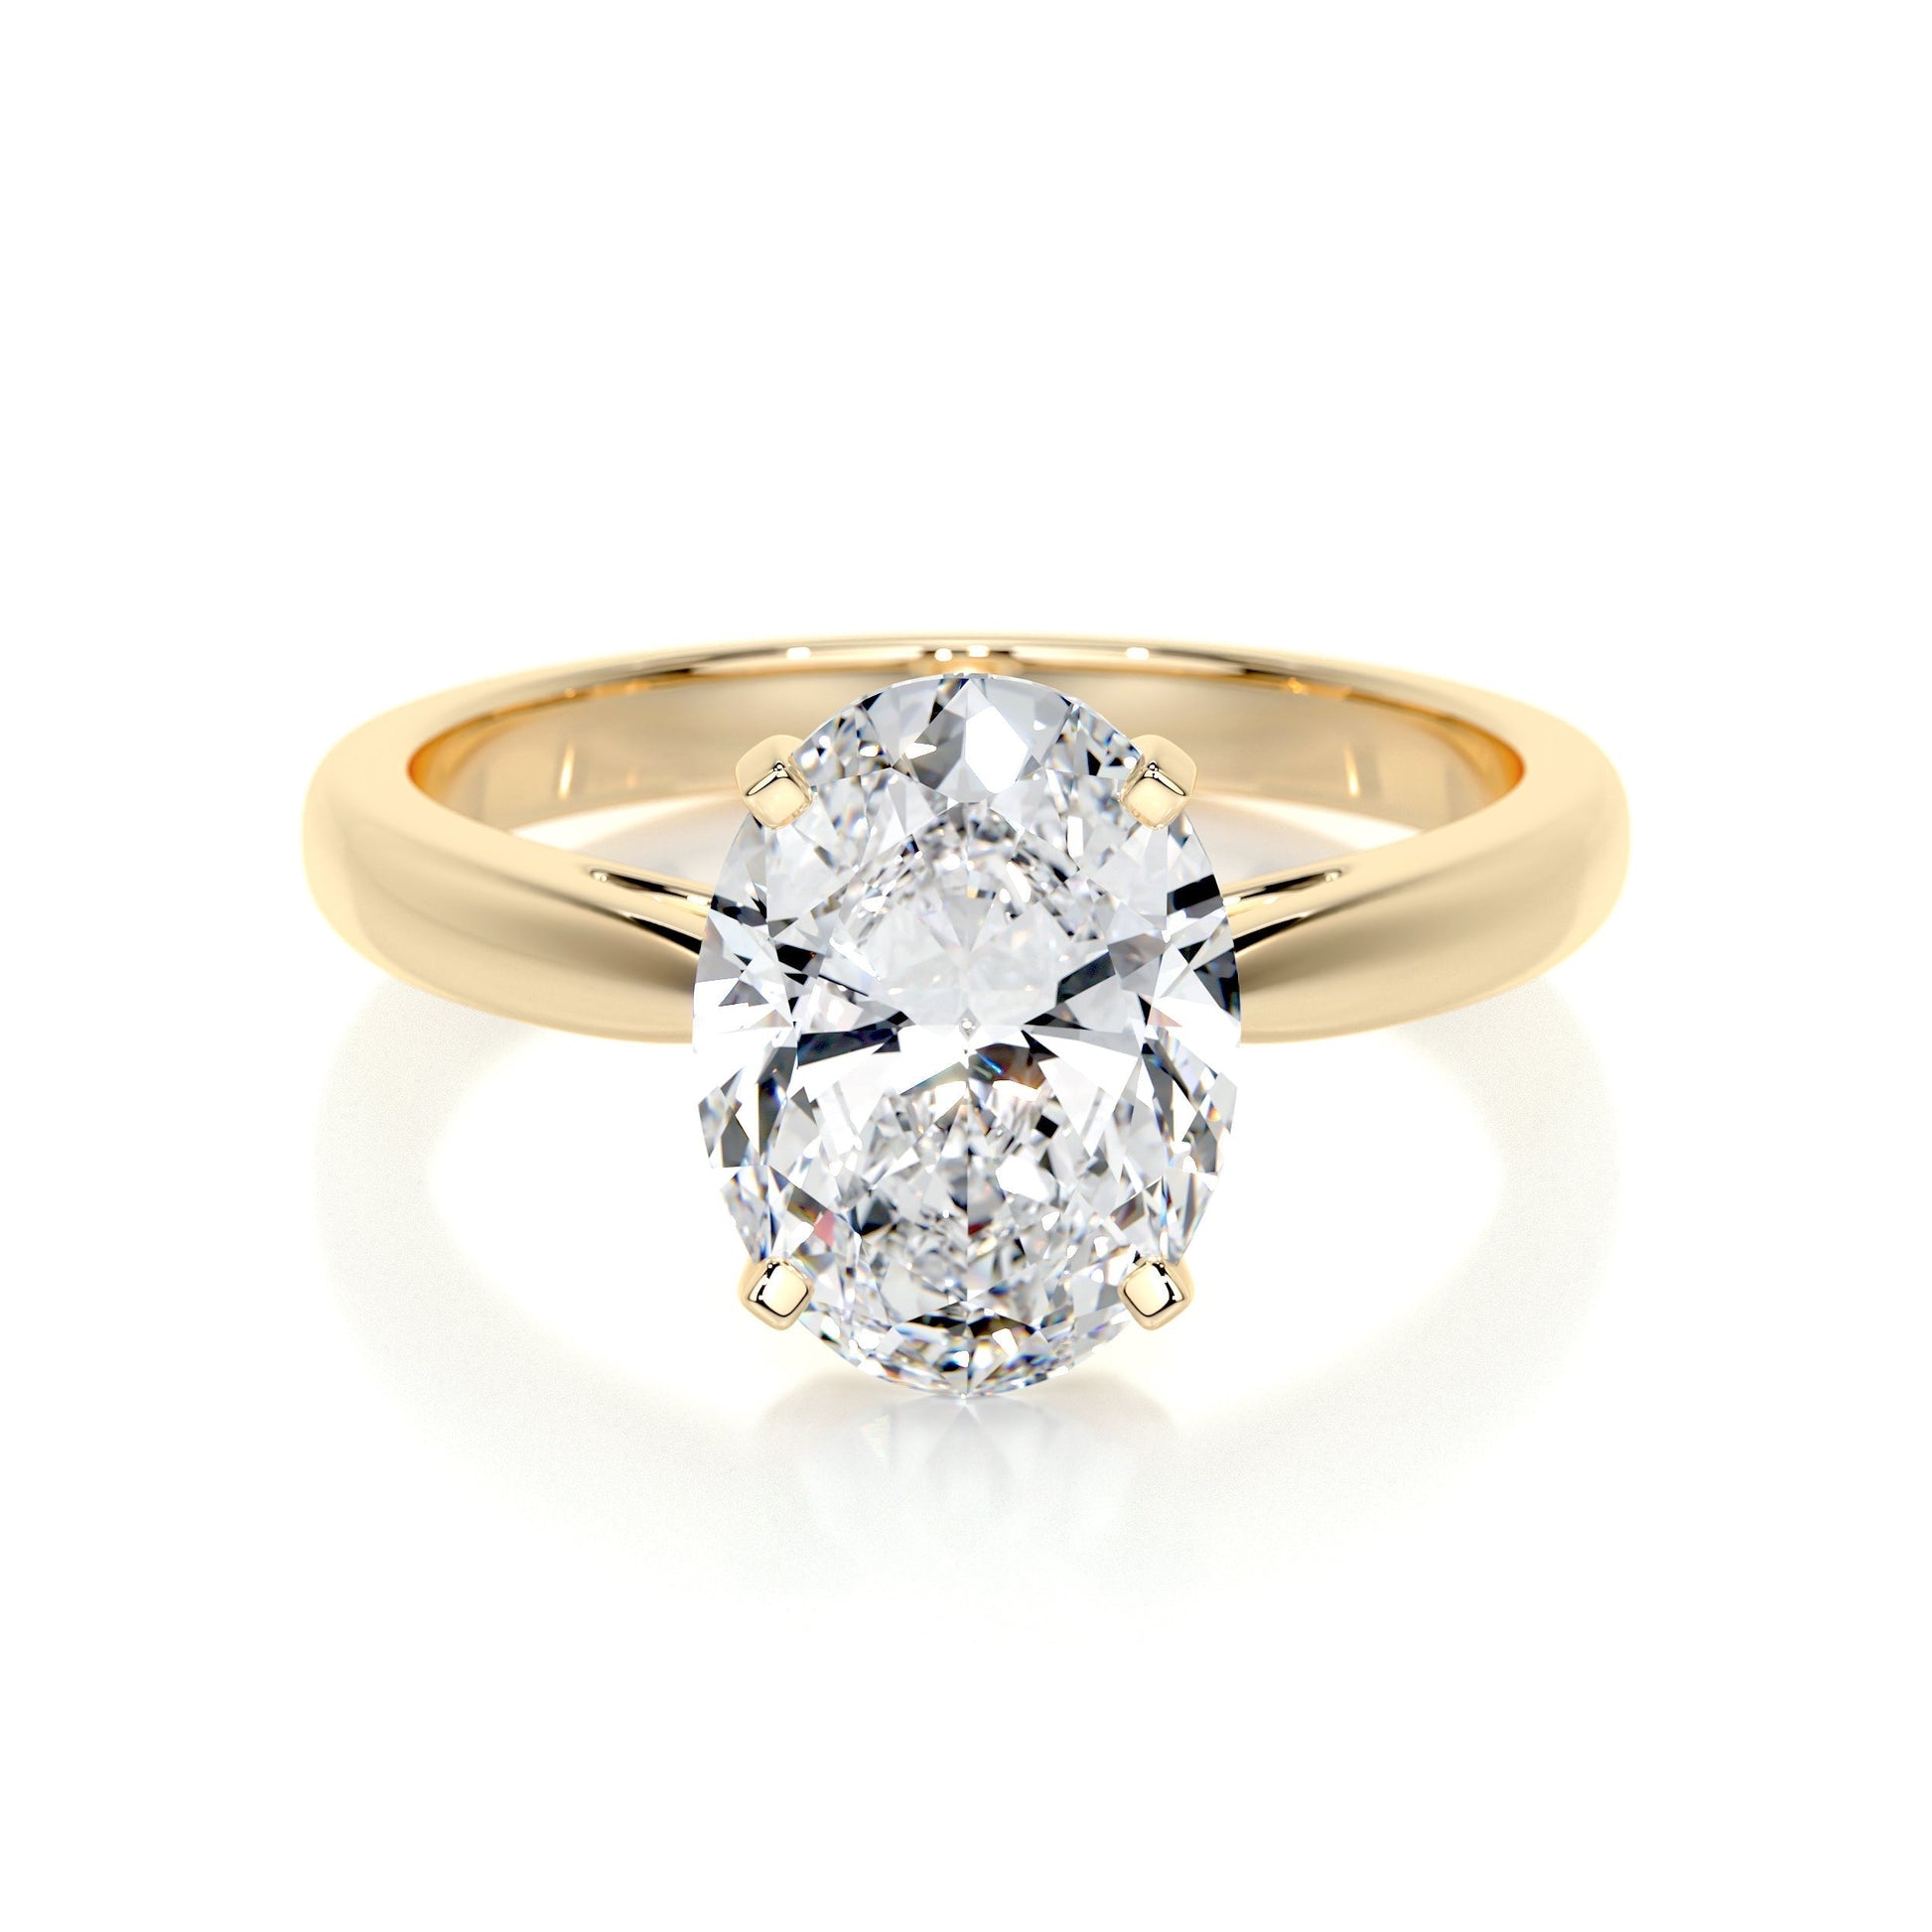 2.0 CT Oval Solitaire CVD G/VS2 Diamond Engagement Ring 7